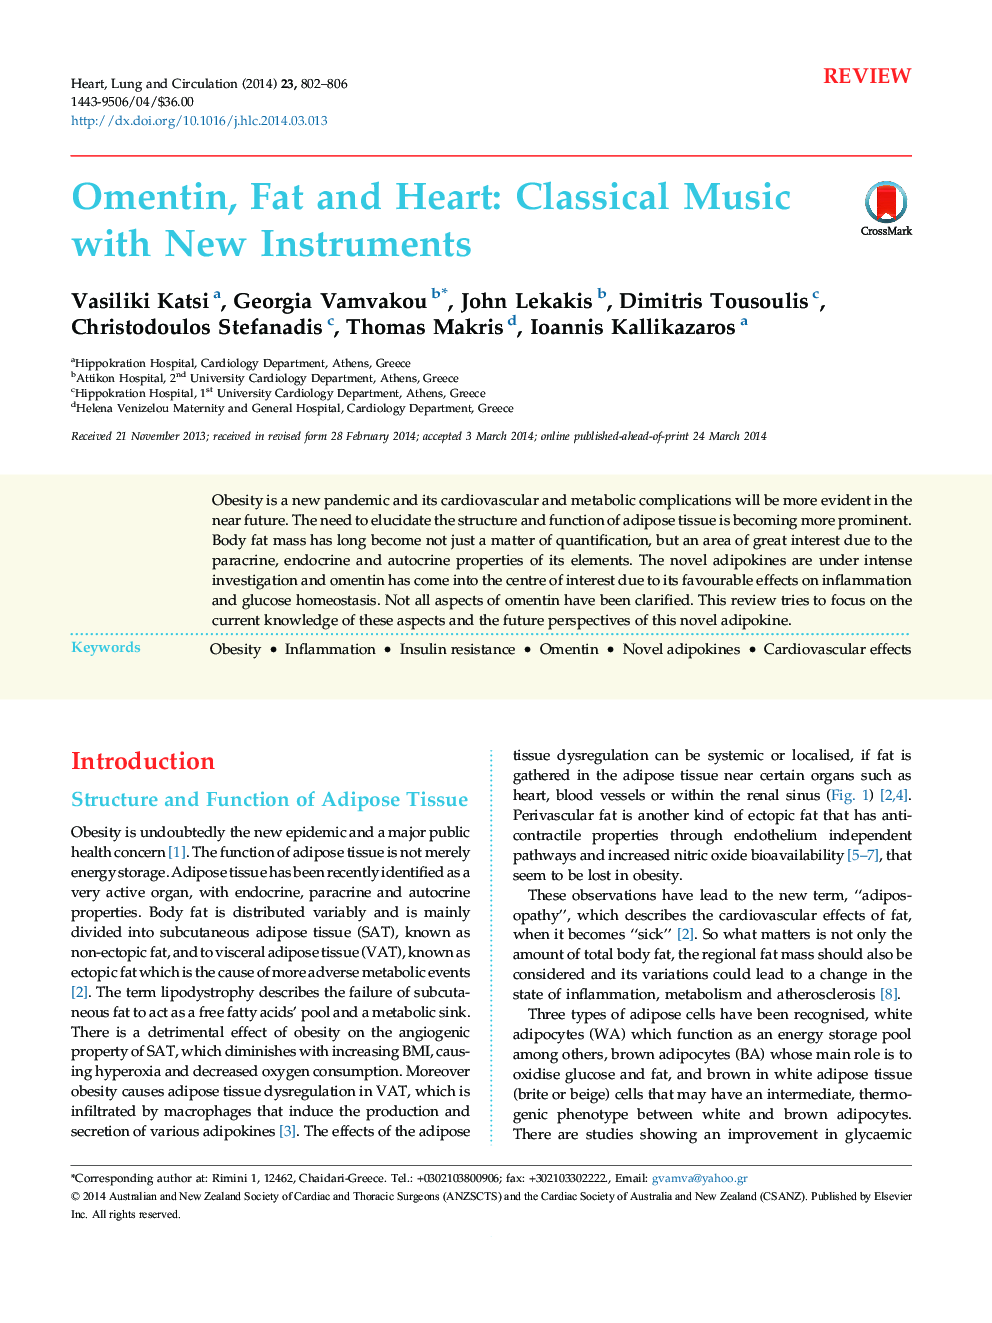 Omentin, Fat and Heart: Classical Music with New Instruments